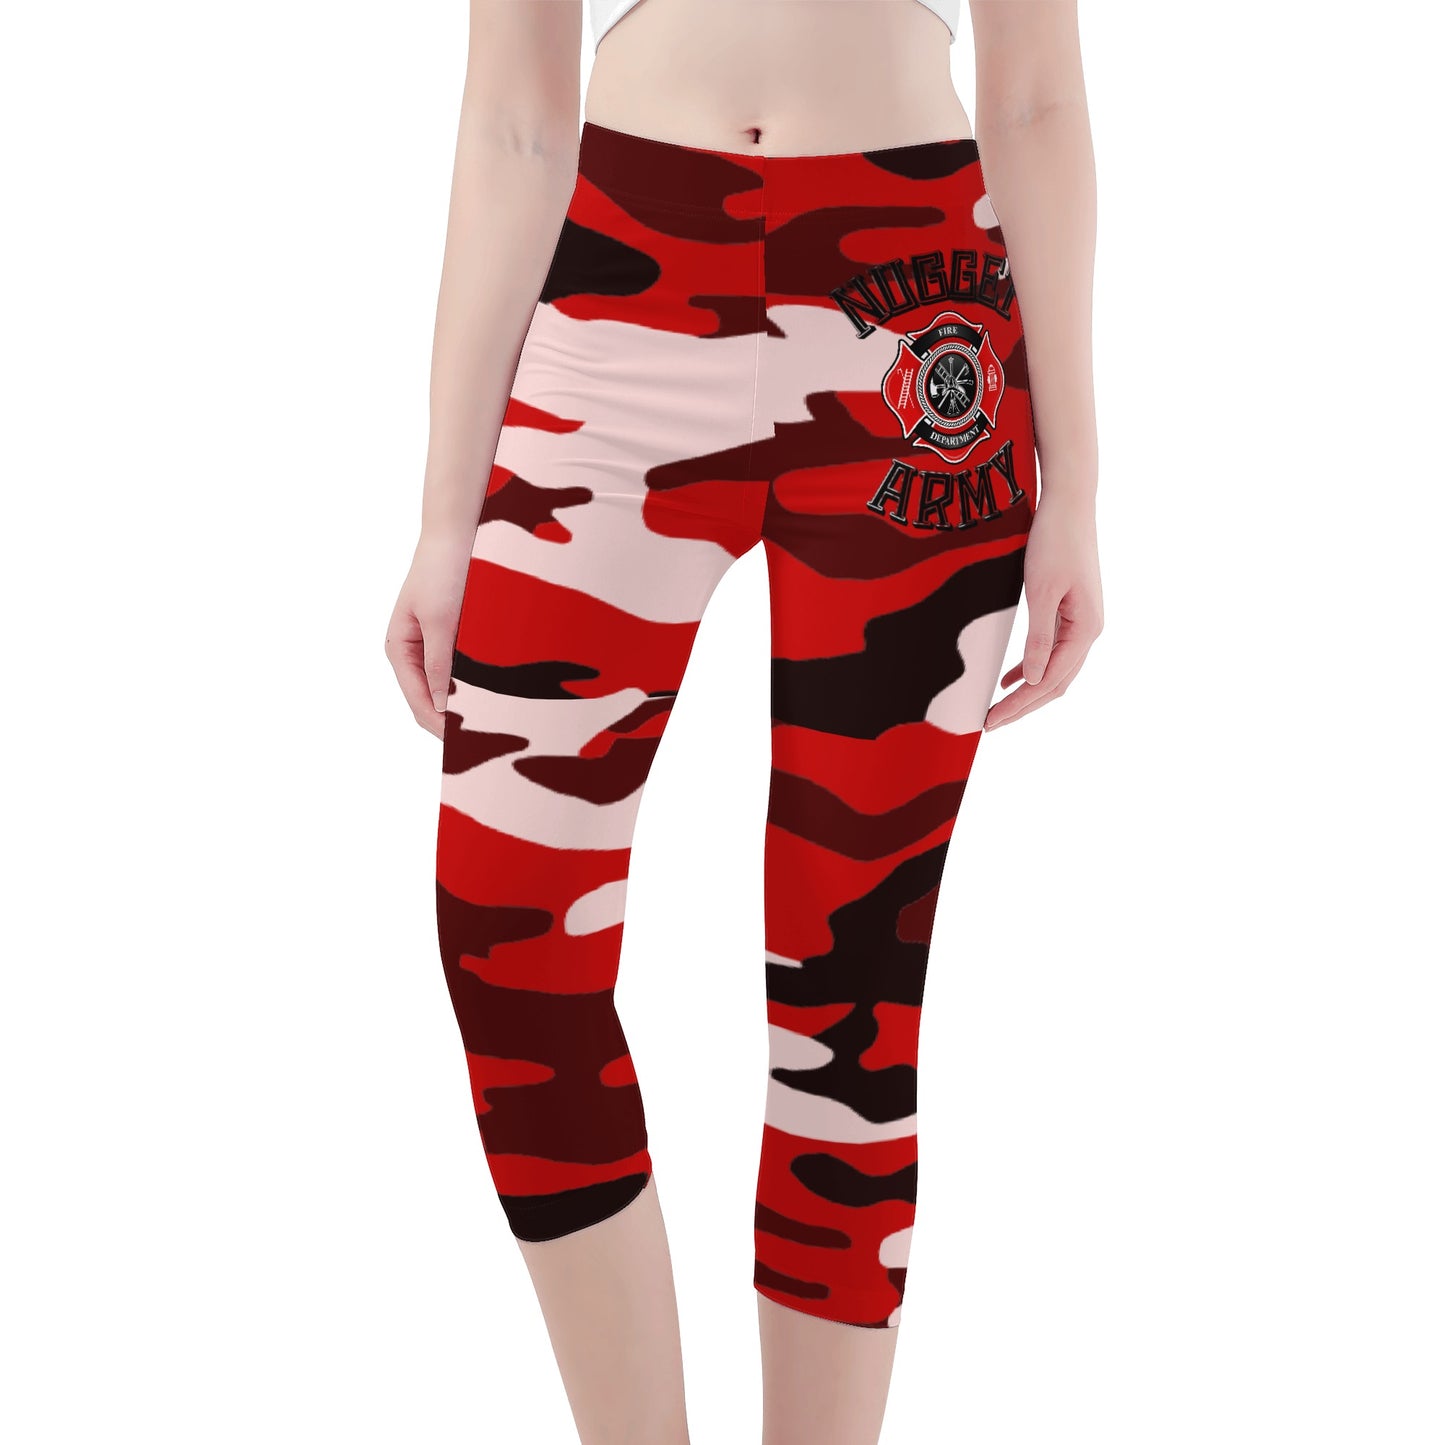 Stand out  with the  Nugget Army Fire Womens Capris  available at Hey Nugget. Grab yours today!